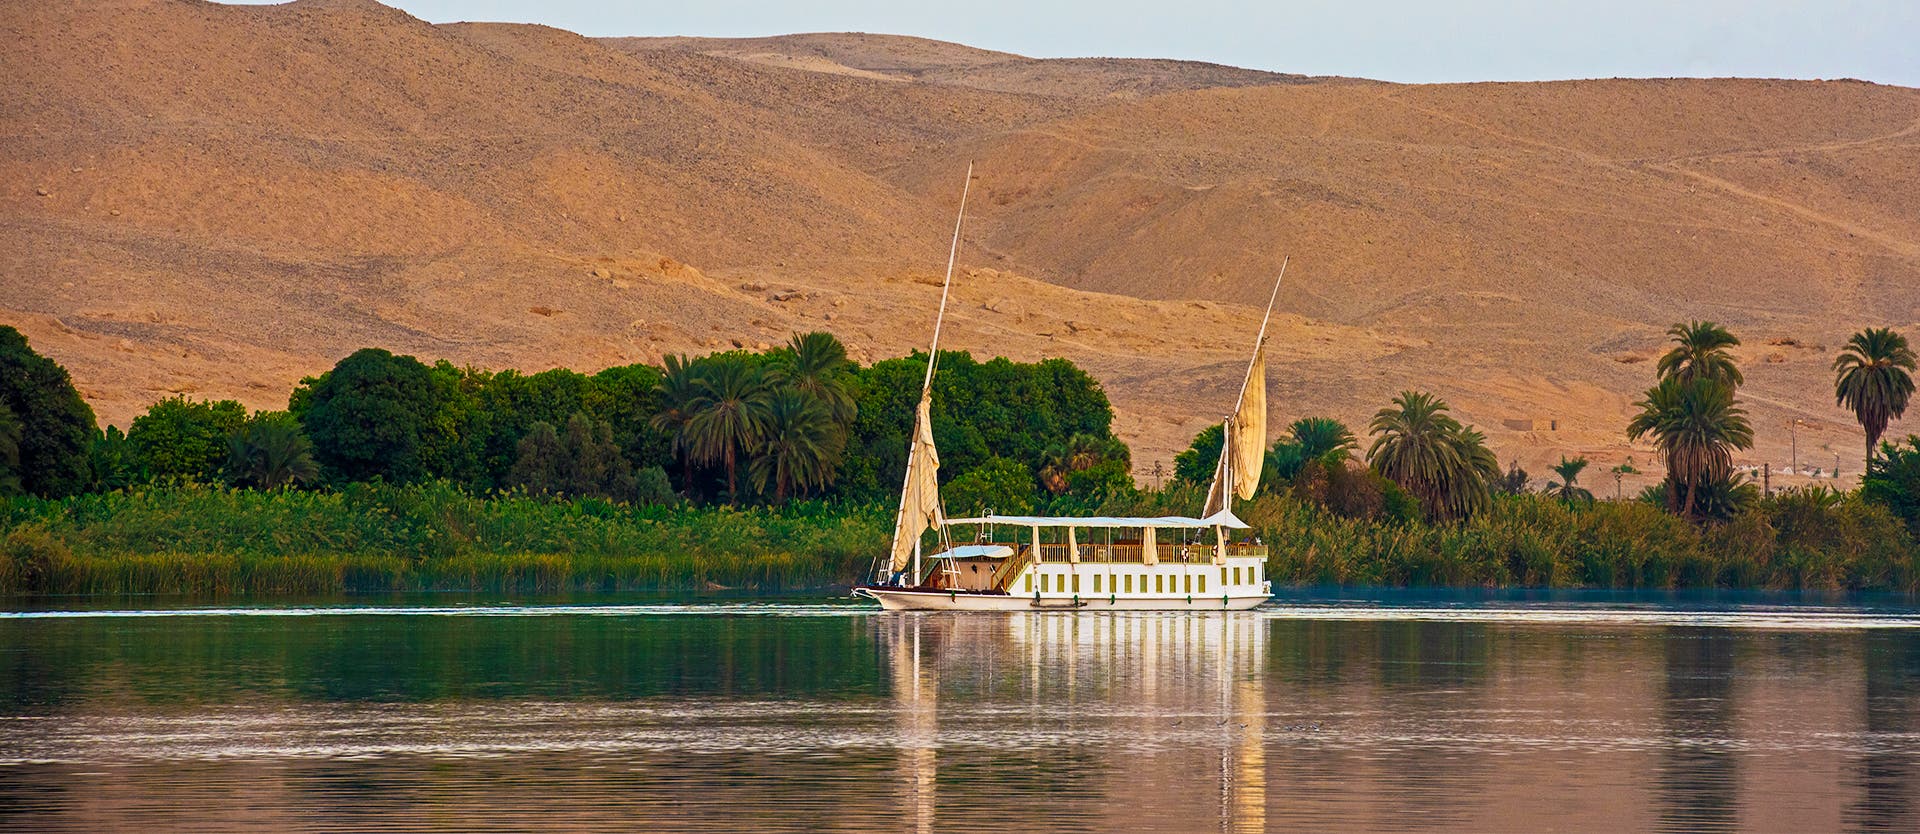 What to see in Égypte Nubie